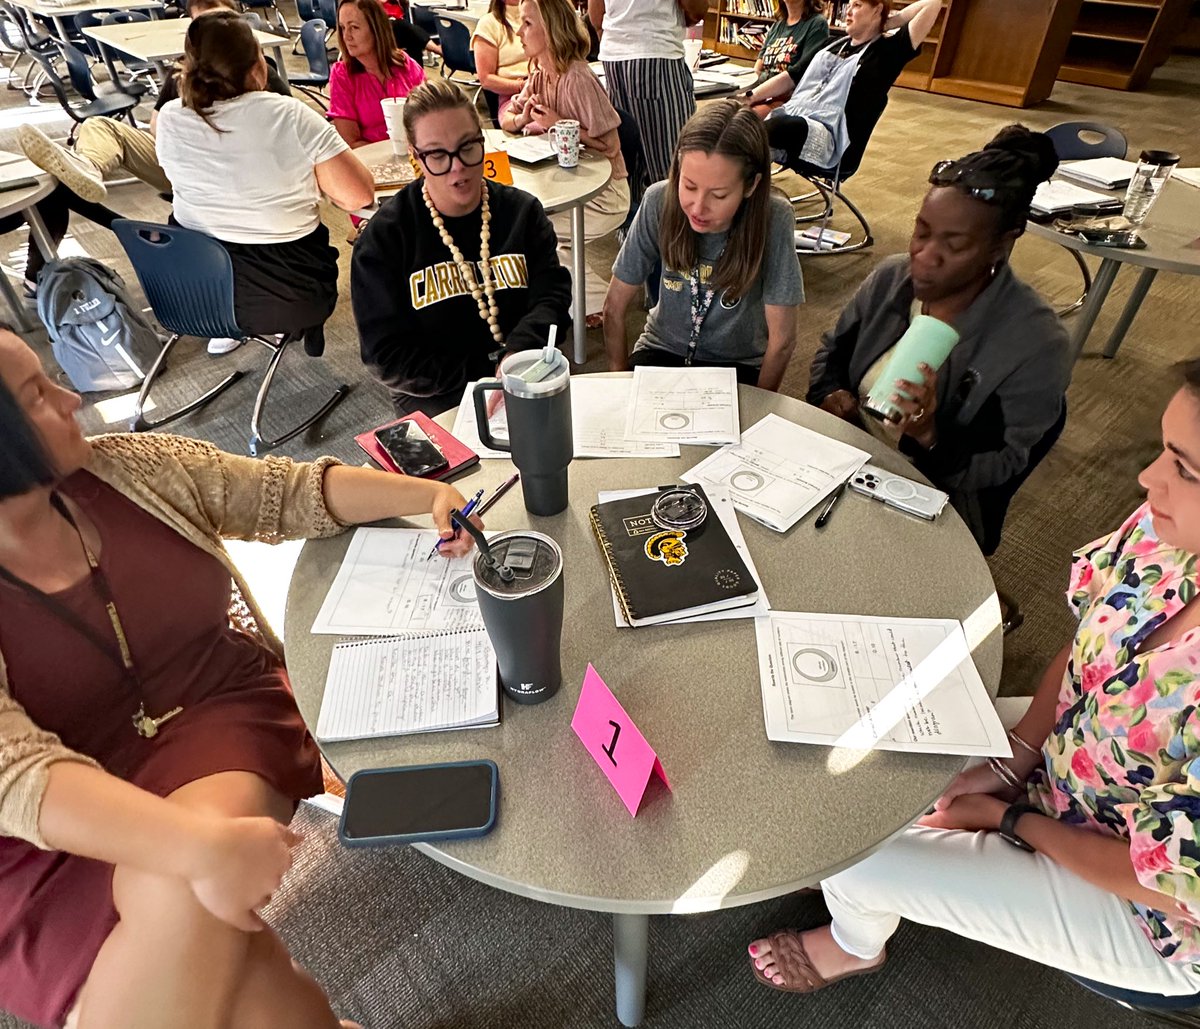 📚 🍎Teachers from @trojansCCS gained even more tools to ignite student thinking by harnessing the magic 🪄 of ✍️ #WritingALittleALot 📝to unlock 🔓 the boundless opportunities in every content area 📓🔬🧮🌎! #PurposefulPD #s3strategies #ActiveLearning #CarrolltonMiddle